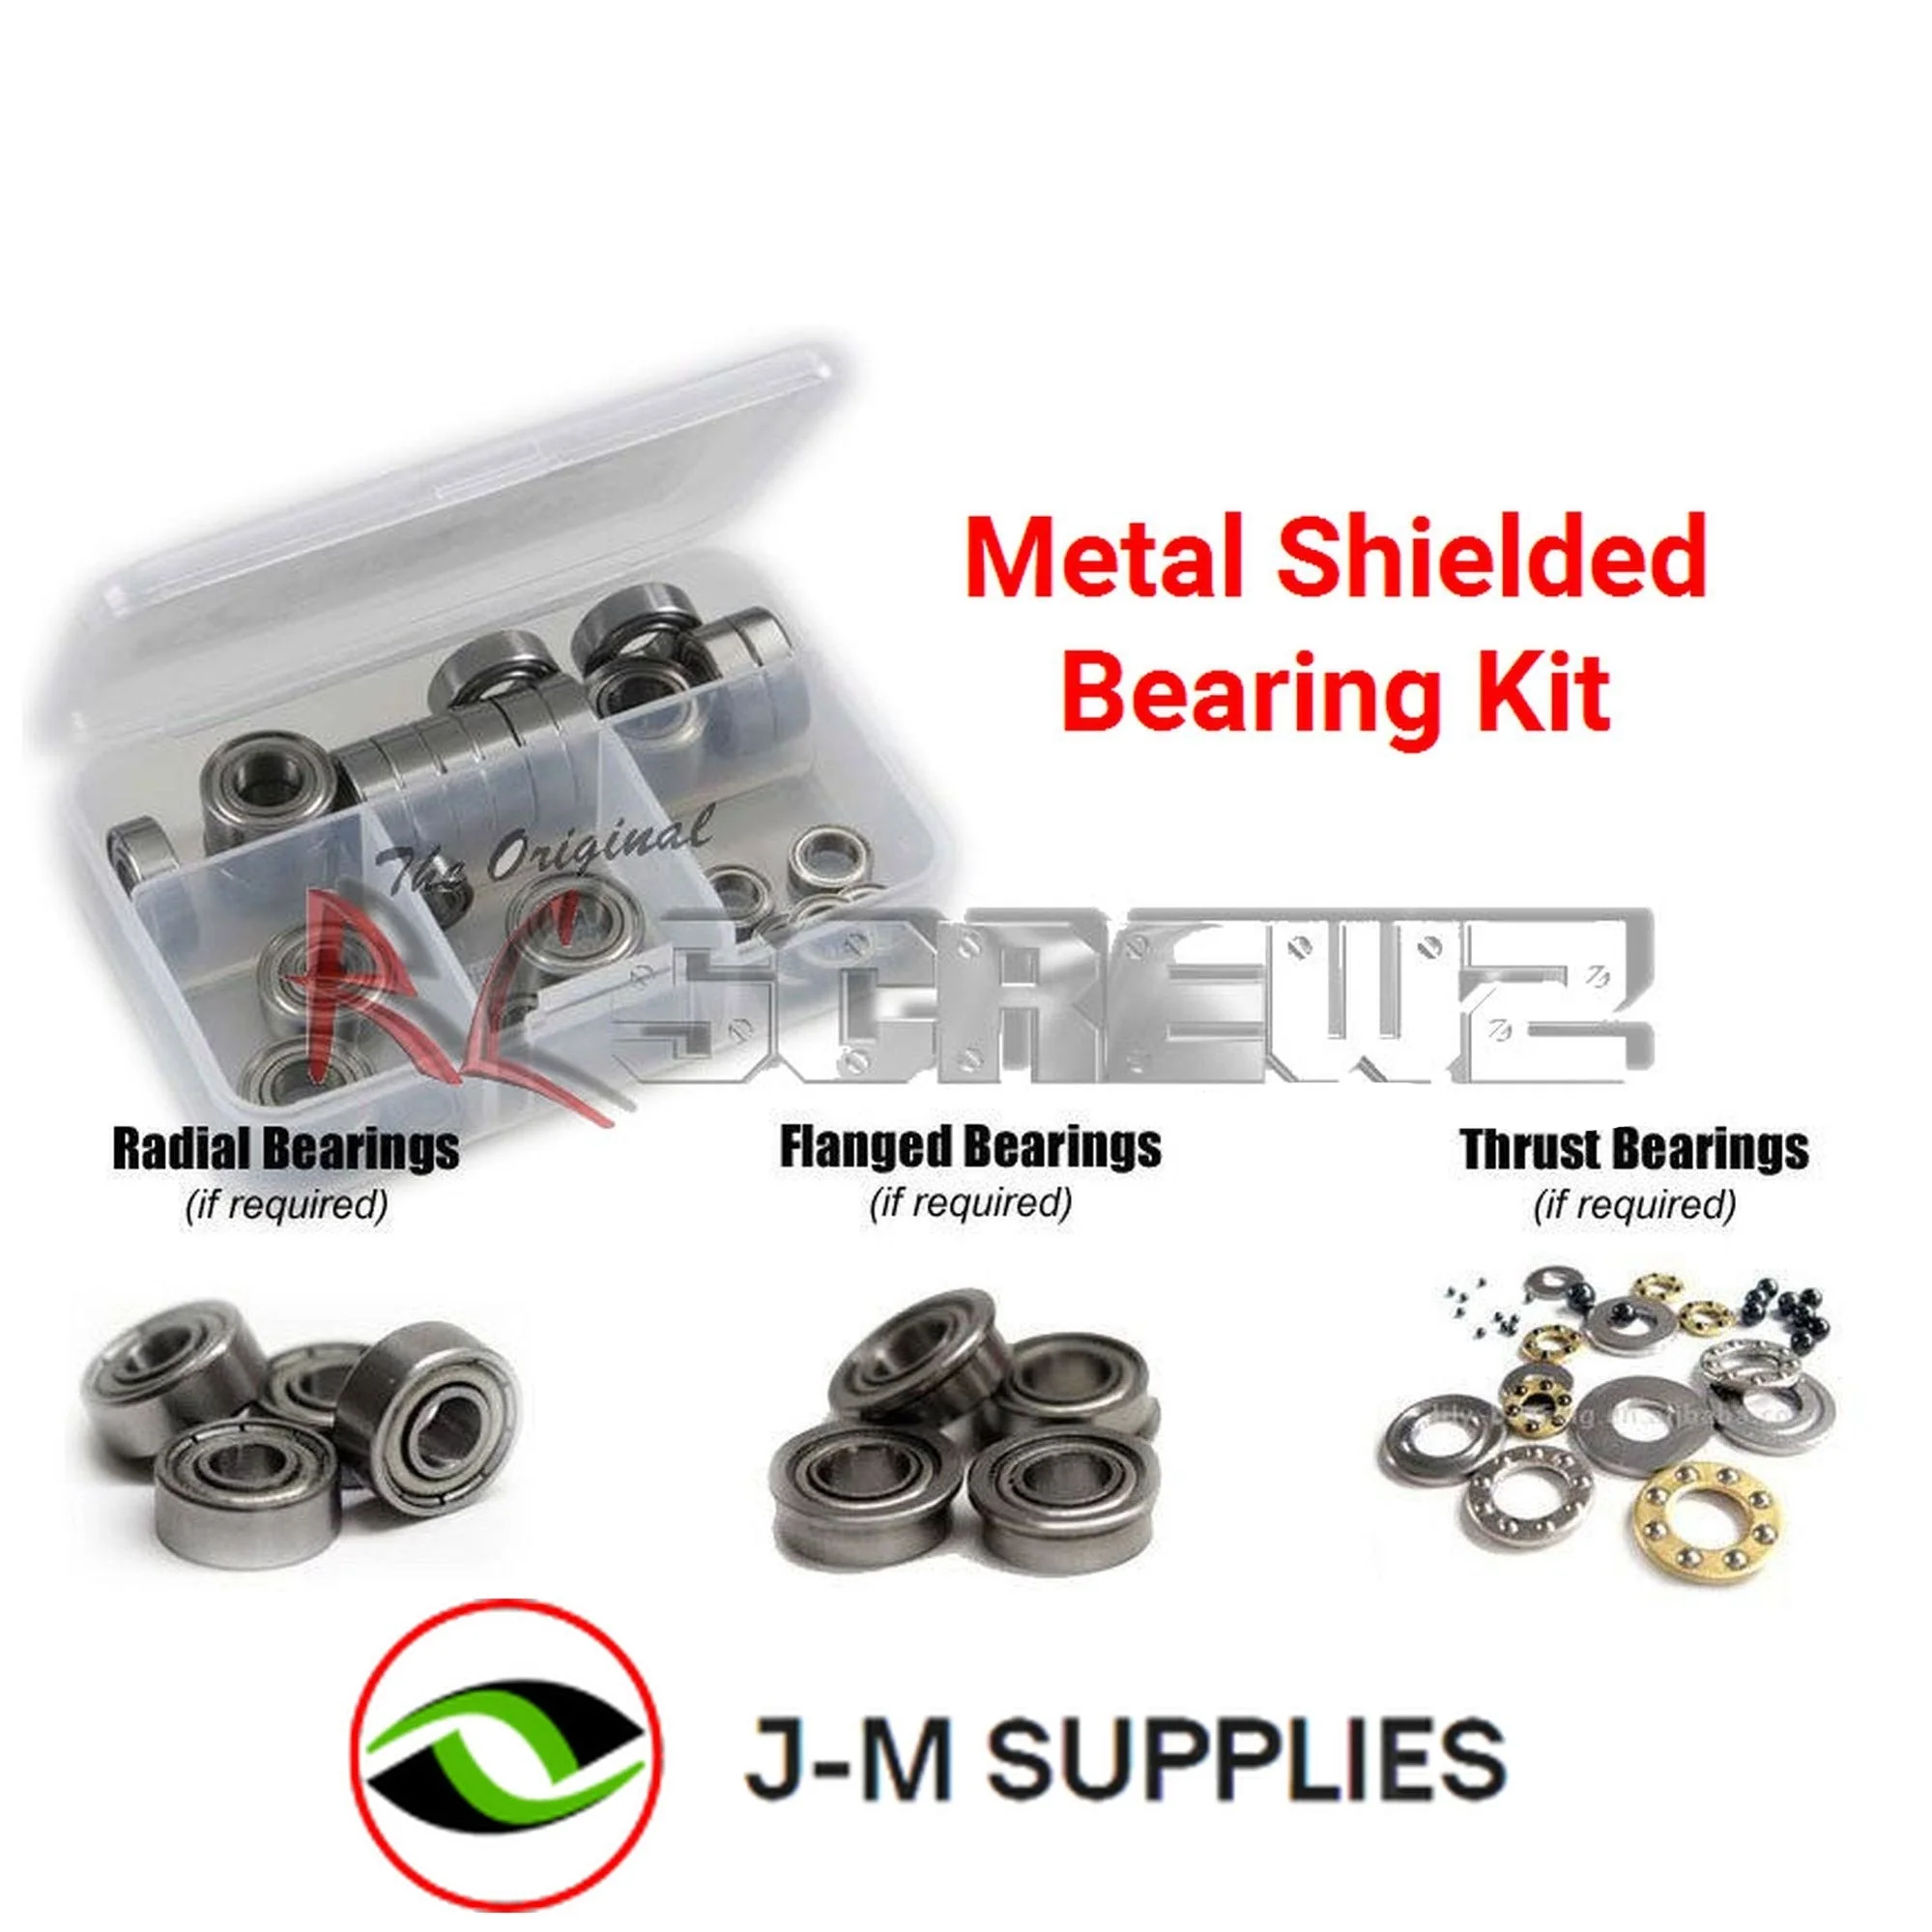 RCScrewZ Metal Shielded Bearing Kit tra070b for Traxxas Summit 1/16 TSM #72076-3 - Picture 1 of 12